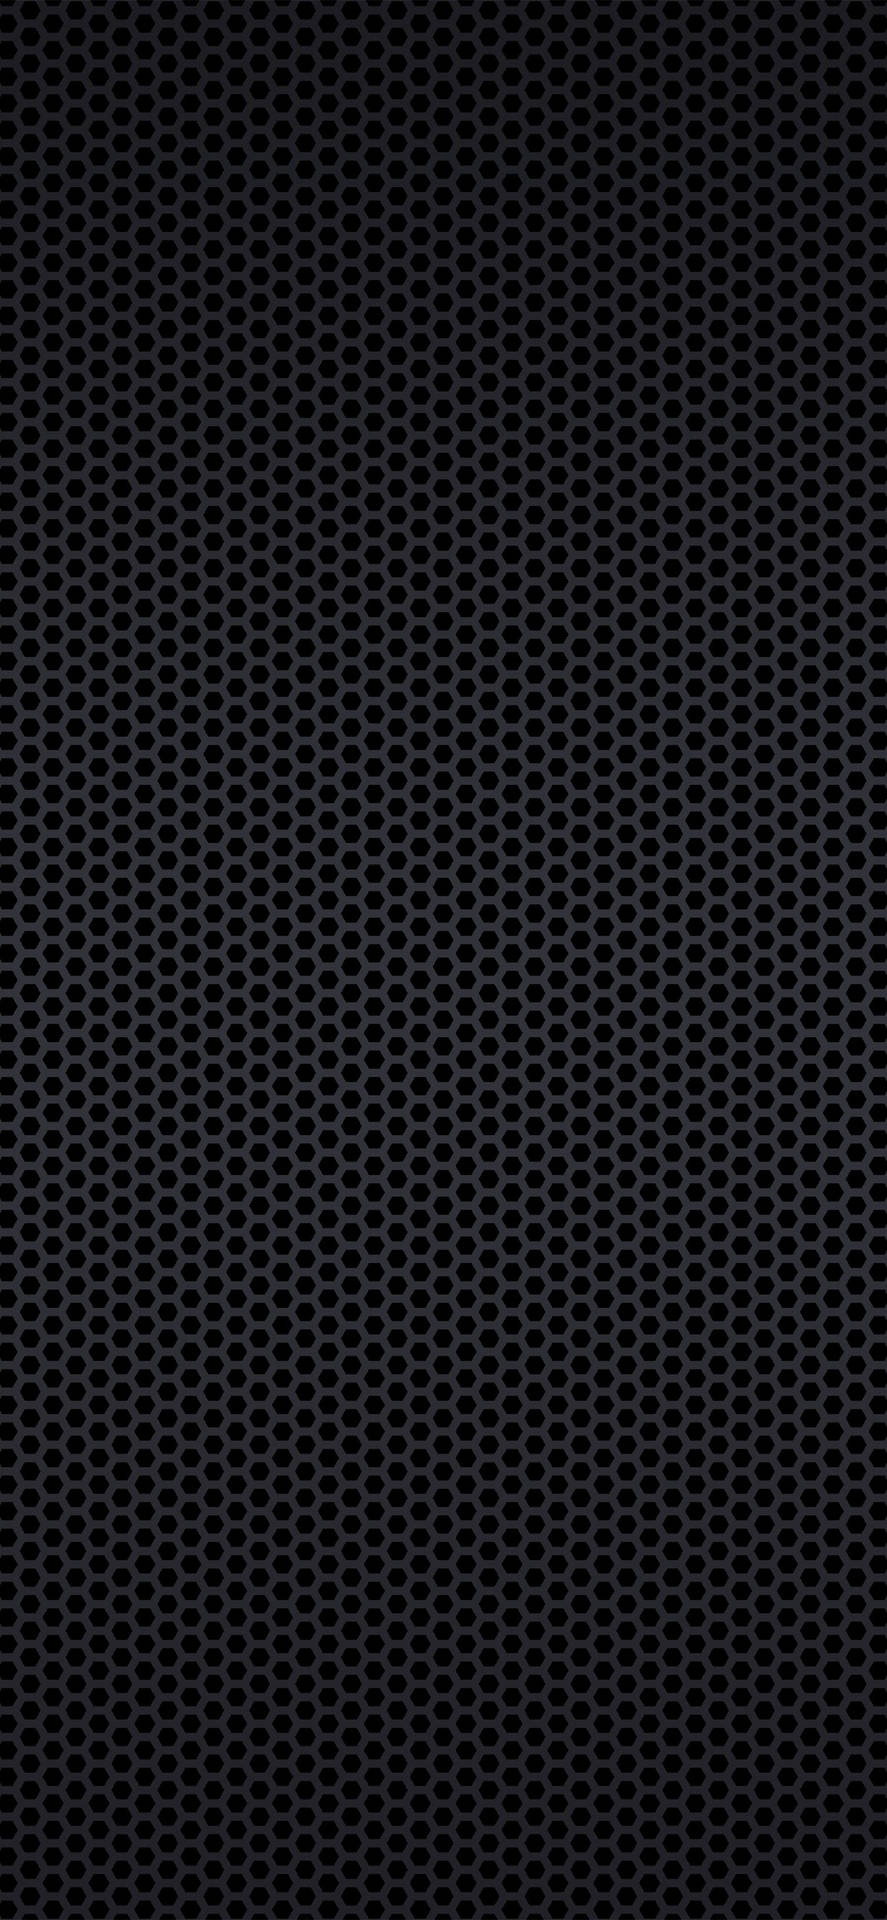 Carbon Honeycomb Grill Dark Mode Background